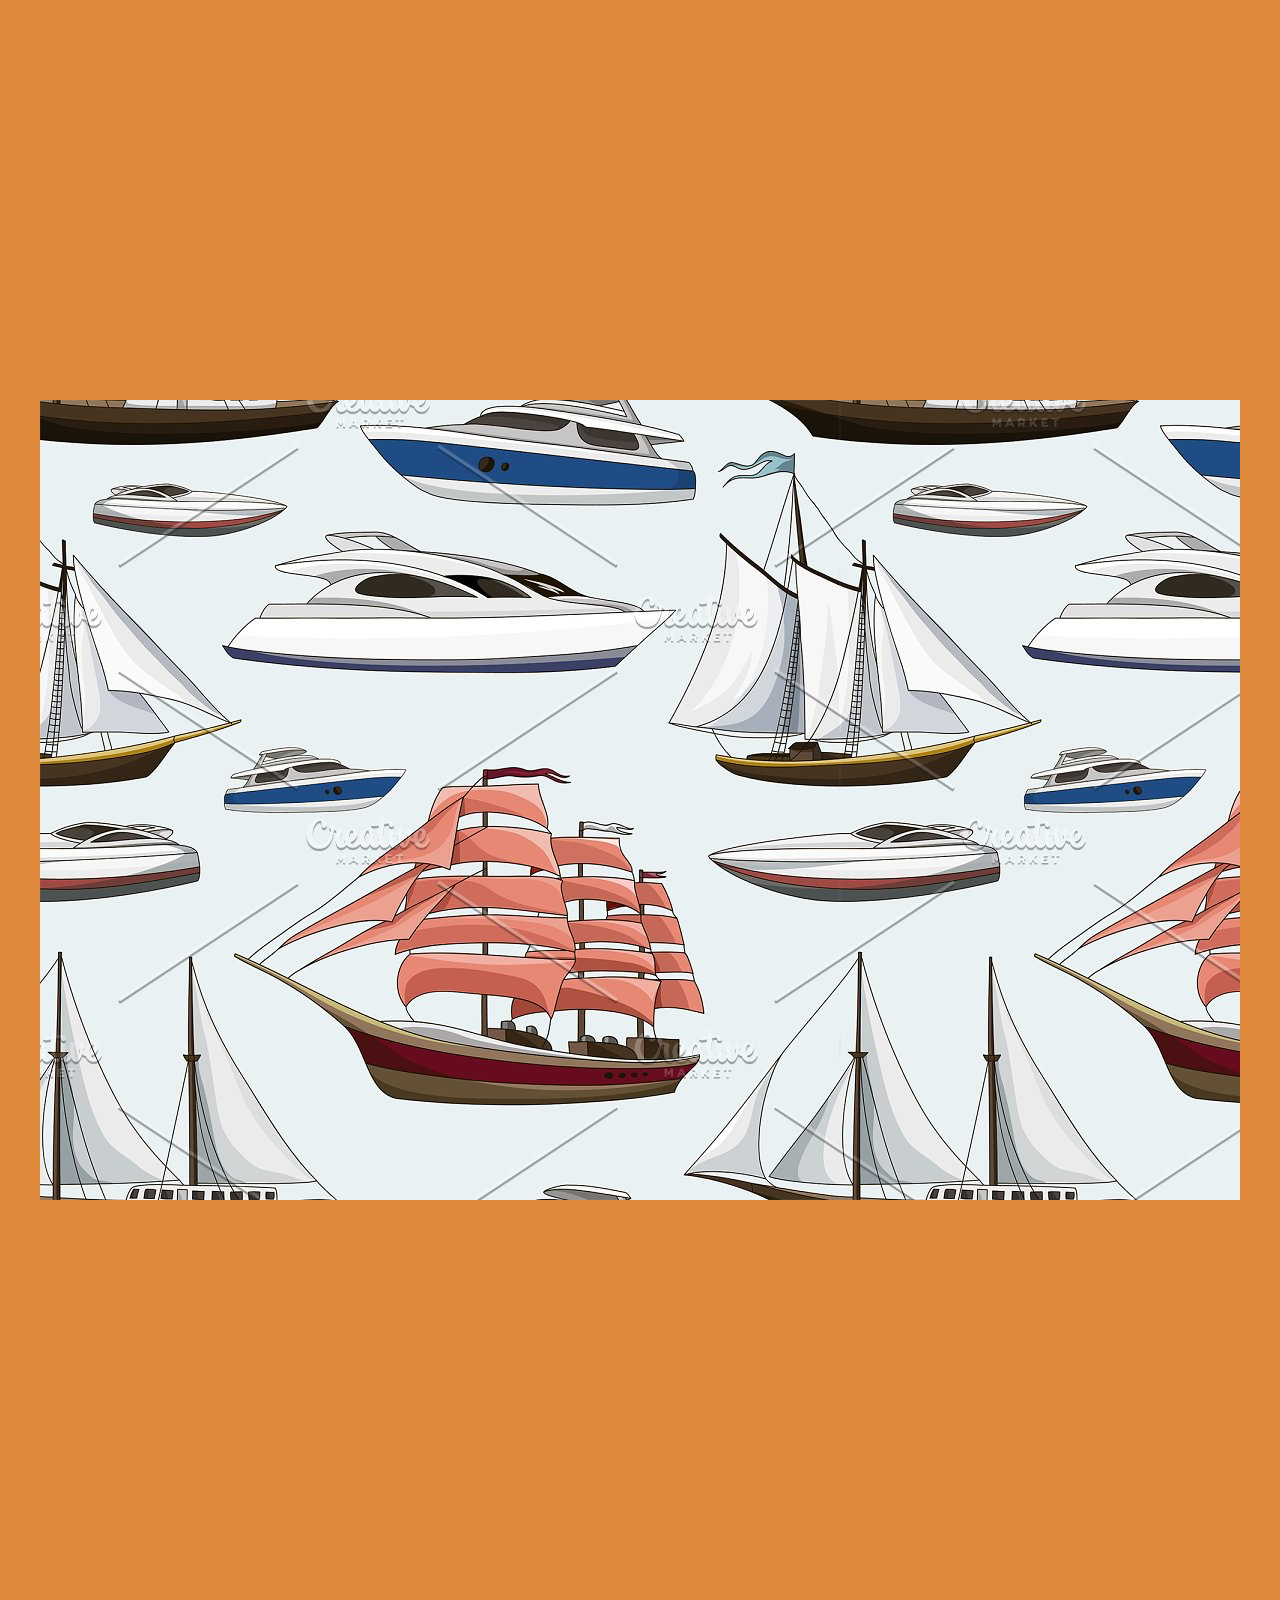 Ships and yachts pattern pinterest image.